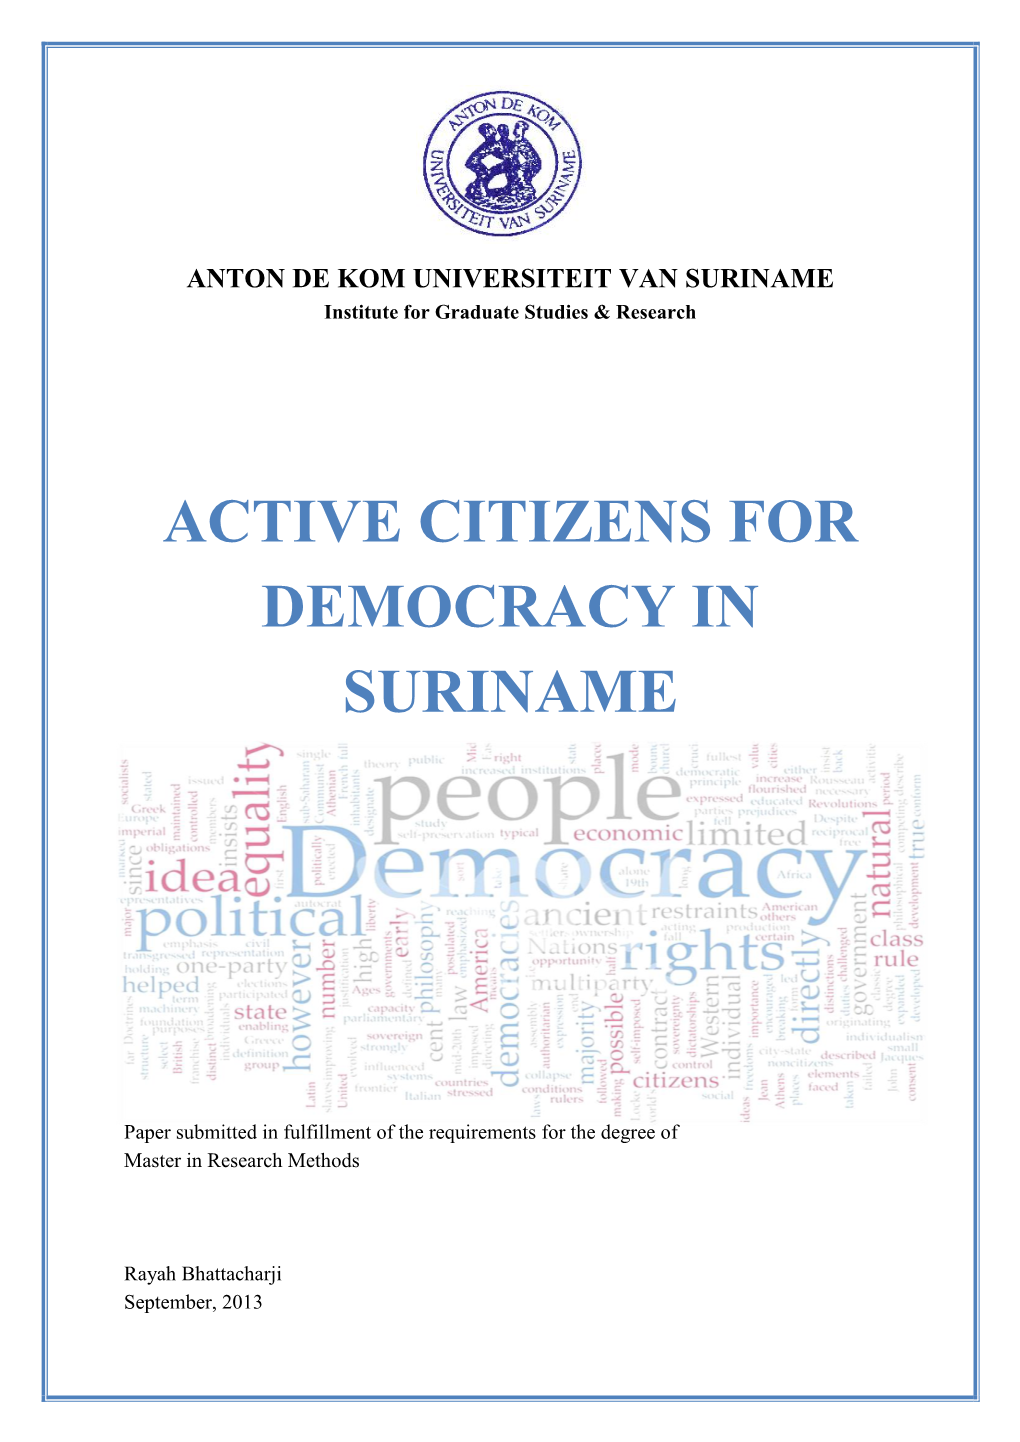 Active Citizens for Democracy in Suriname